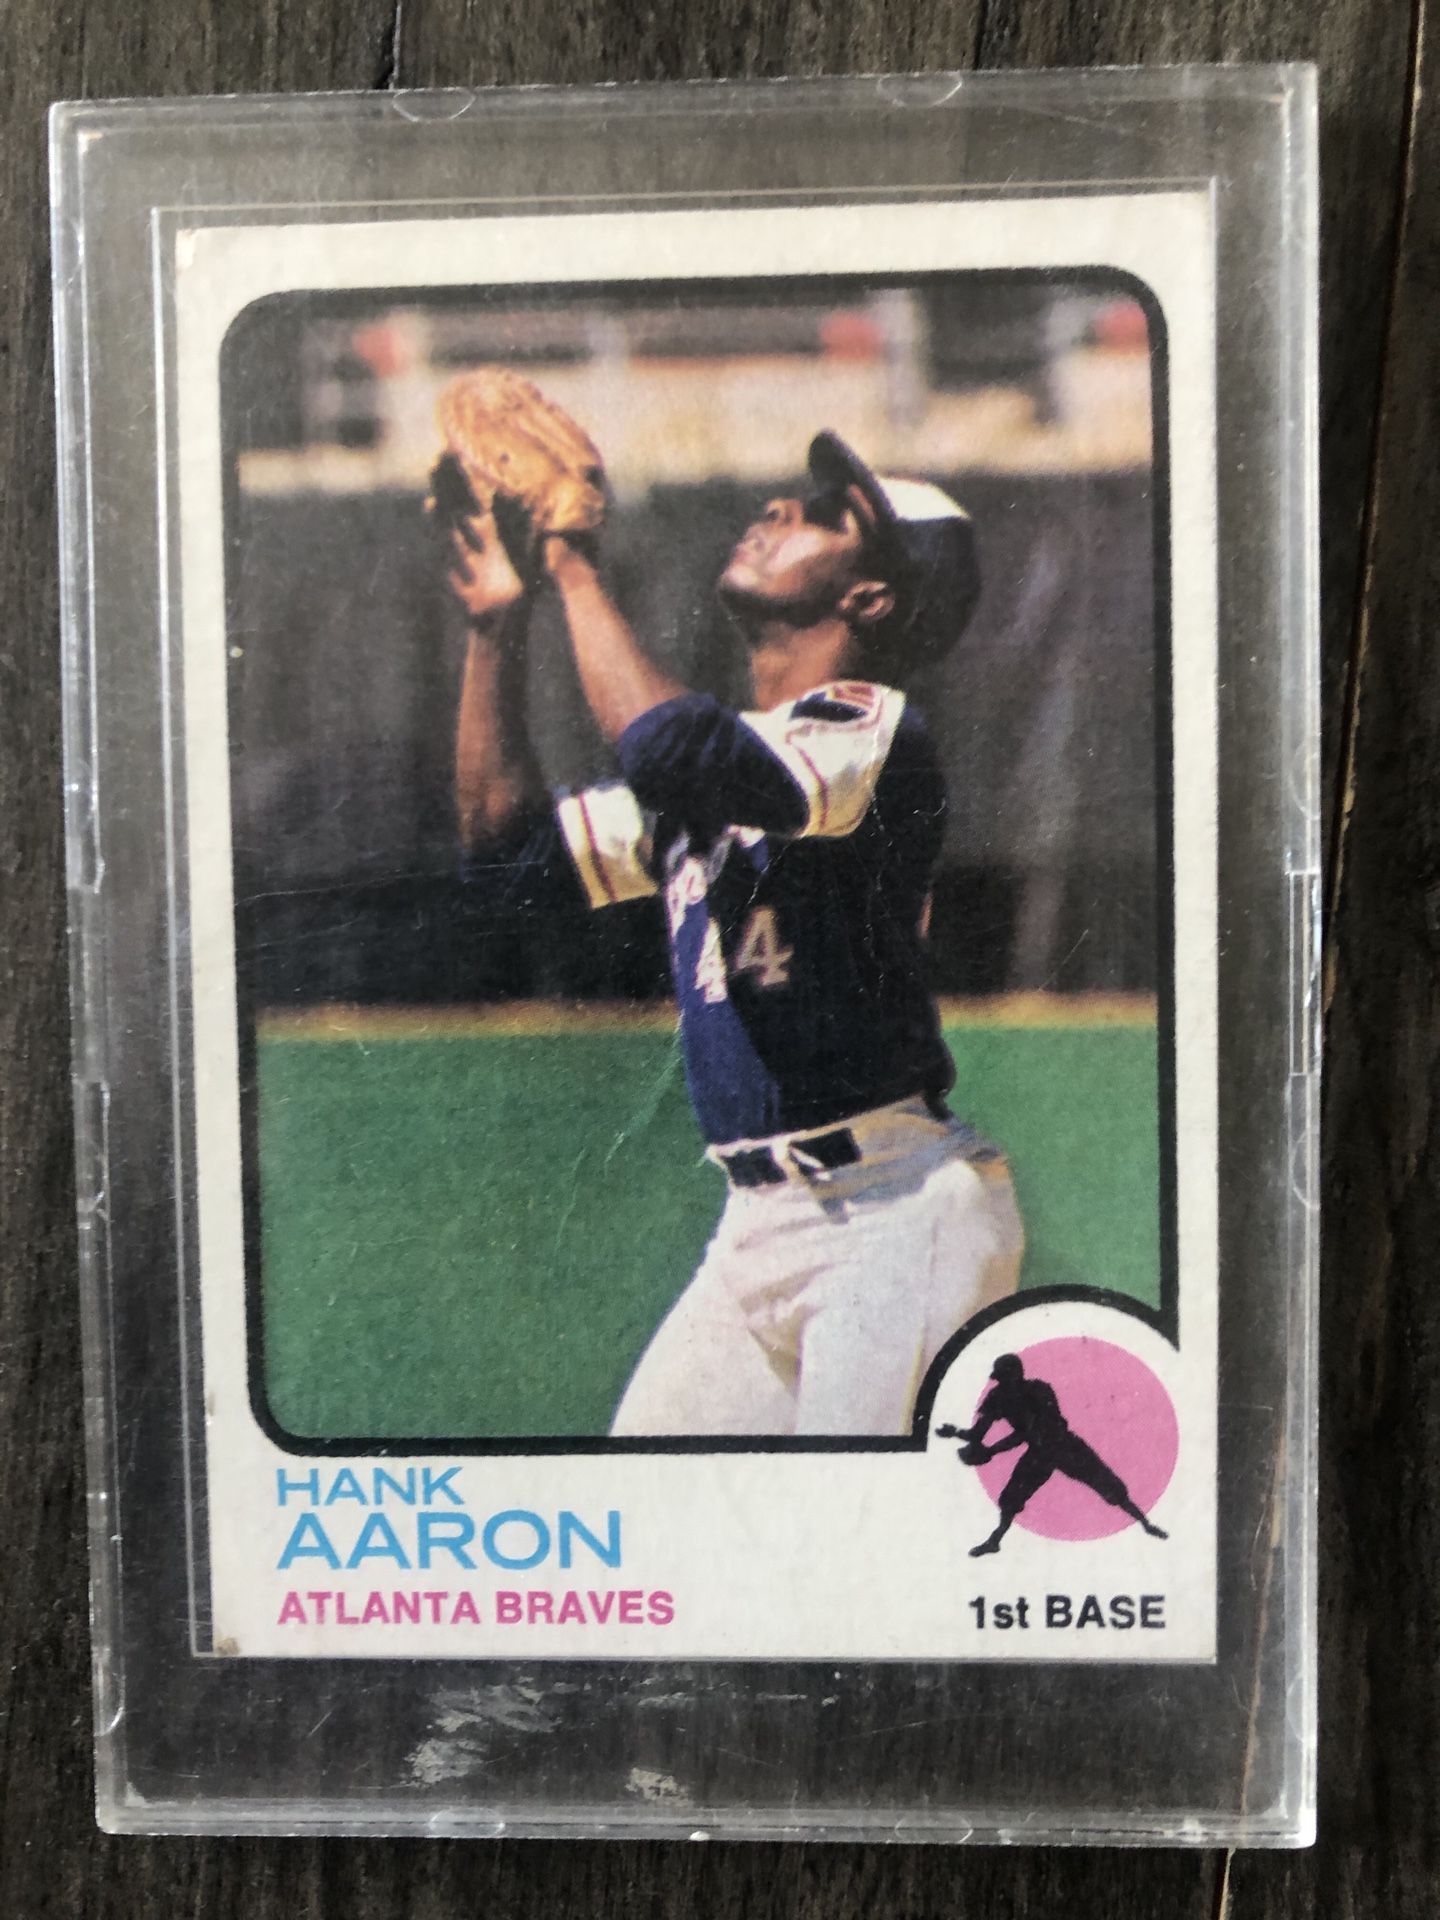 1973 Topps Hank Aaron Baseball Card #100. There is some damage to the back of the card but the front is in great condition!